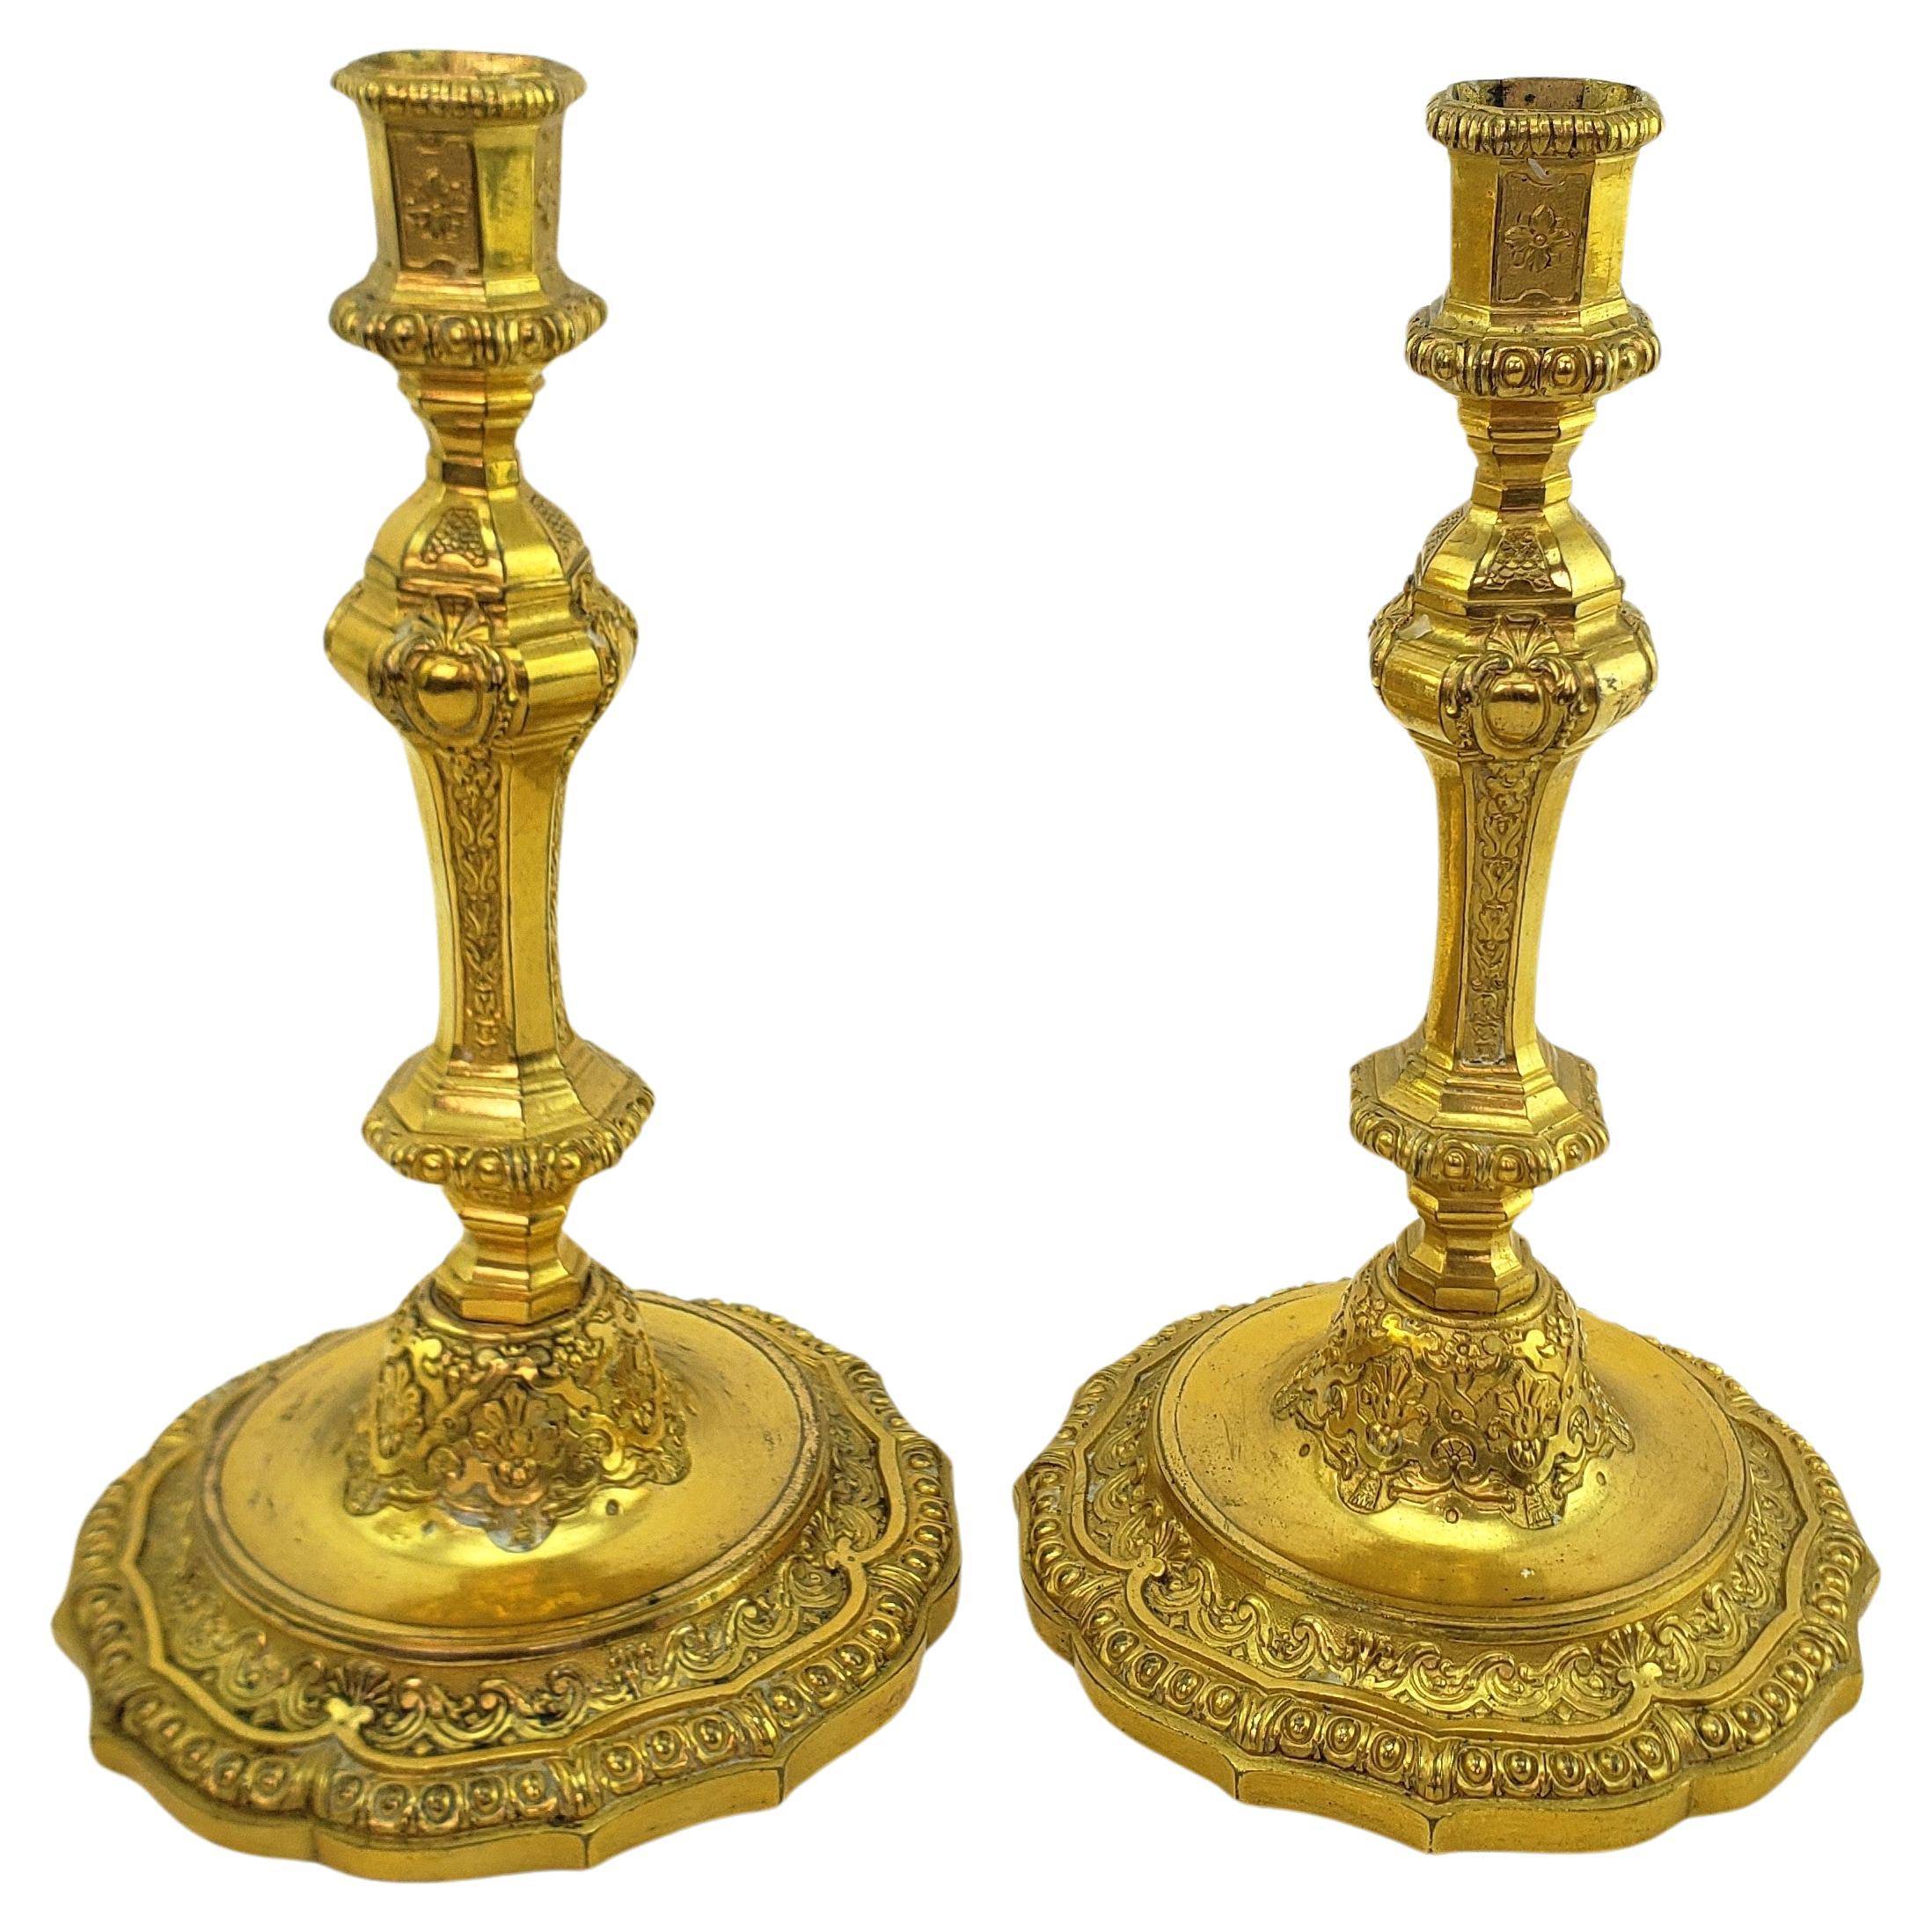 Pair of Antique Louis XIV Styled Gilt Bronze Candlesticks with Stylized Flowers